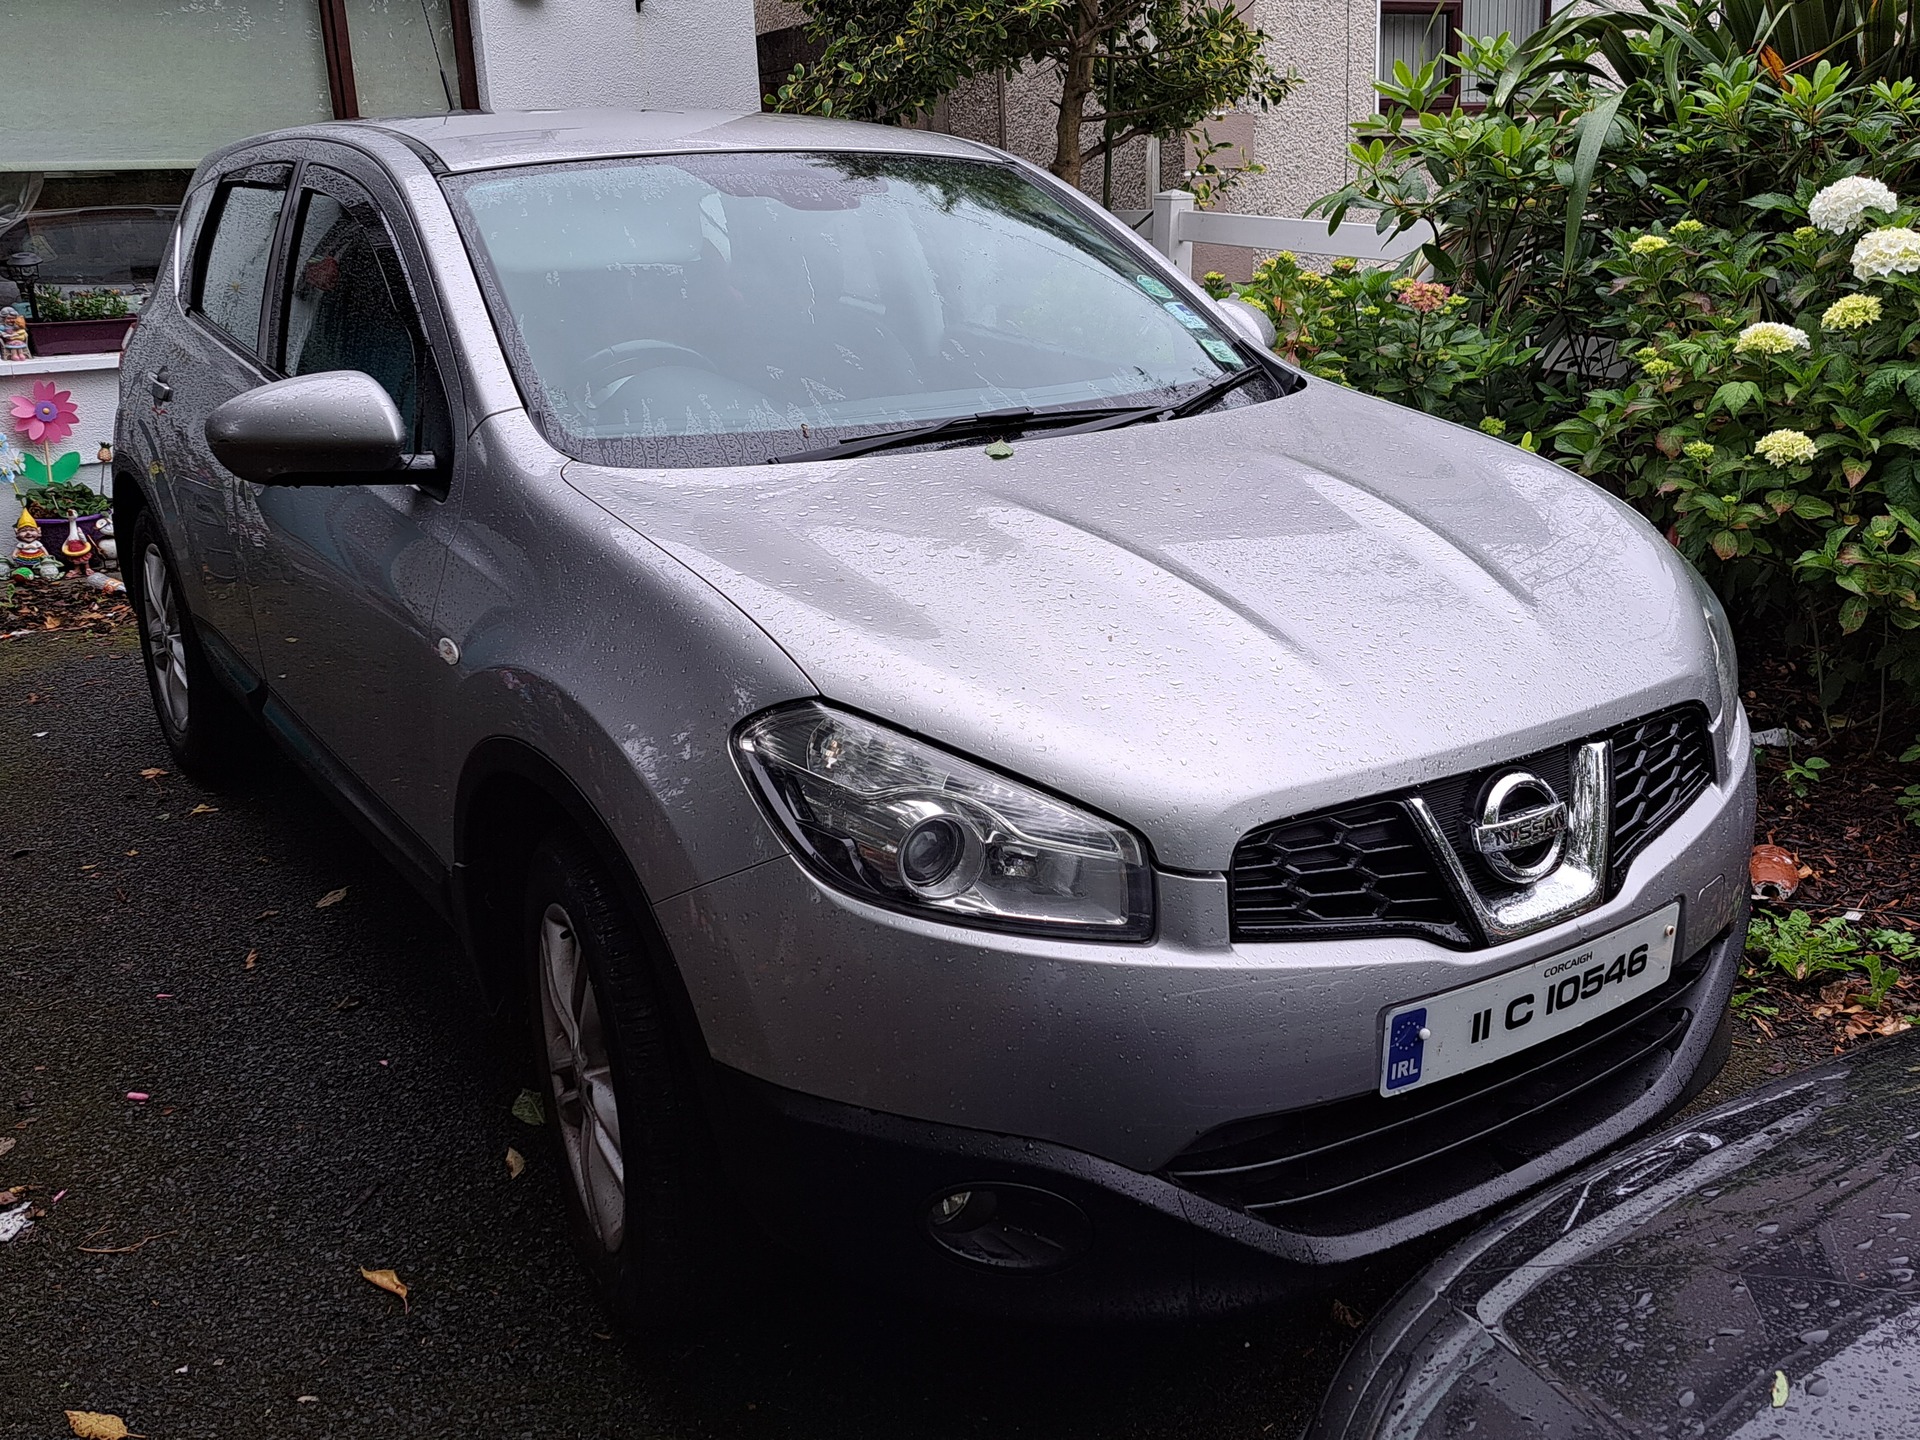 Used Nissan Qashqai 2011 in Galway